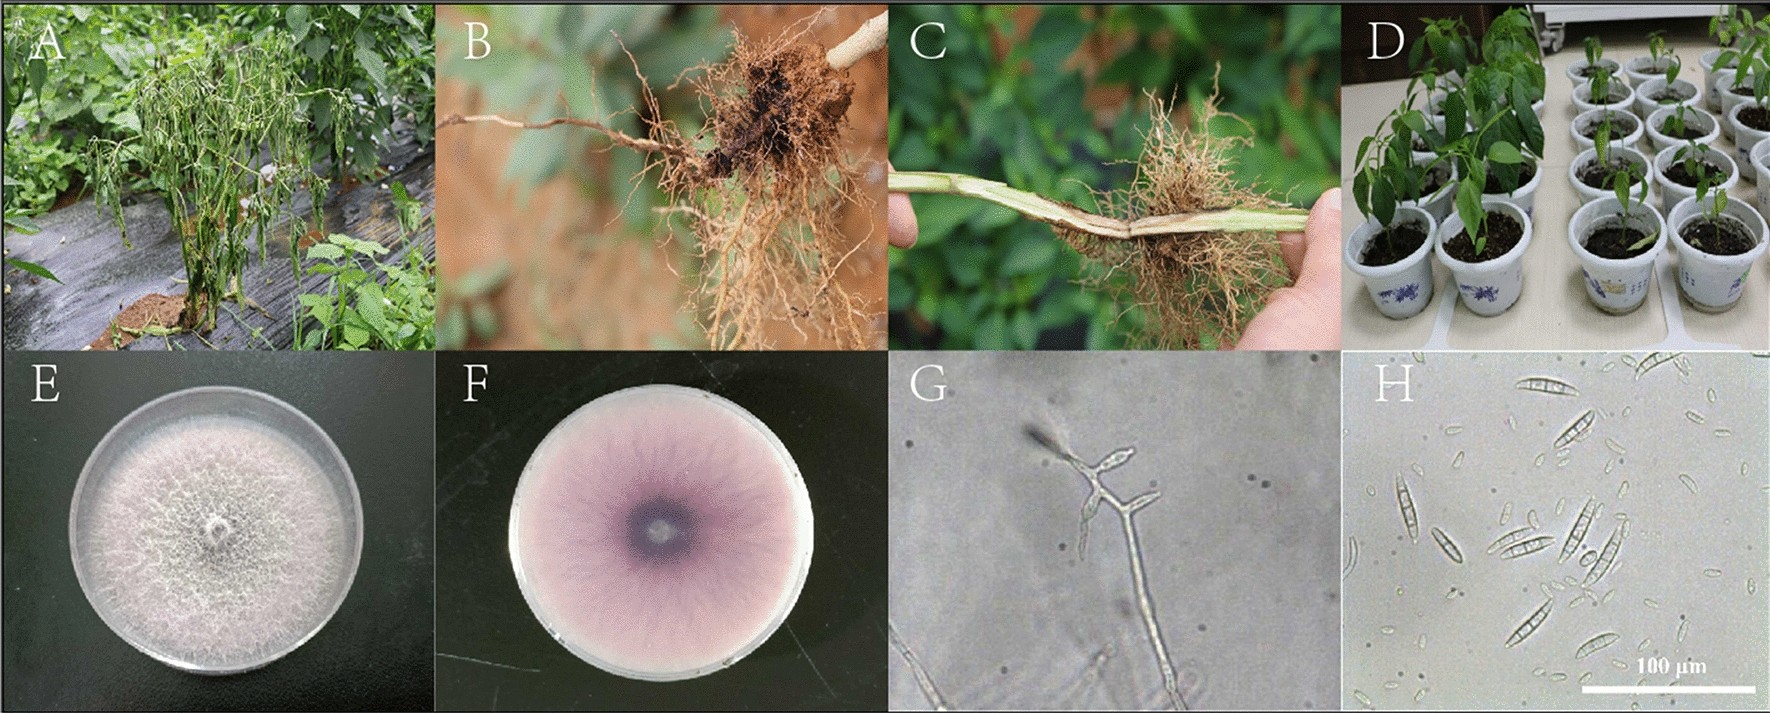 Meet the Fungal Parasites of Your Crops and Health - ActivePure Blog